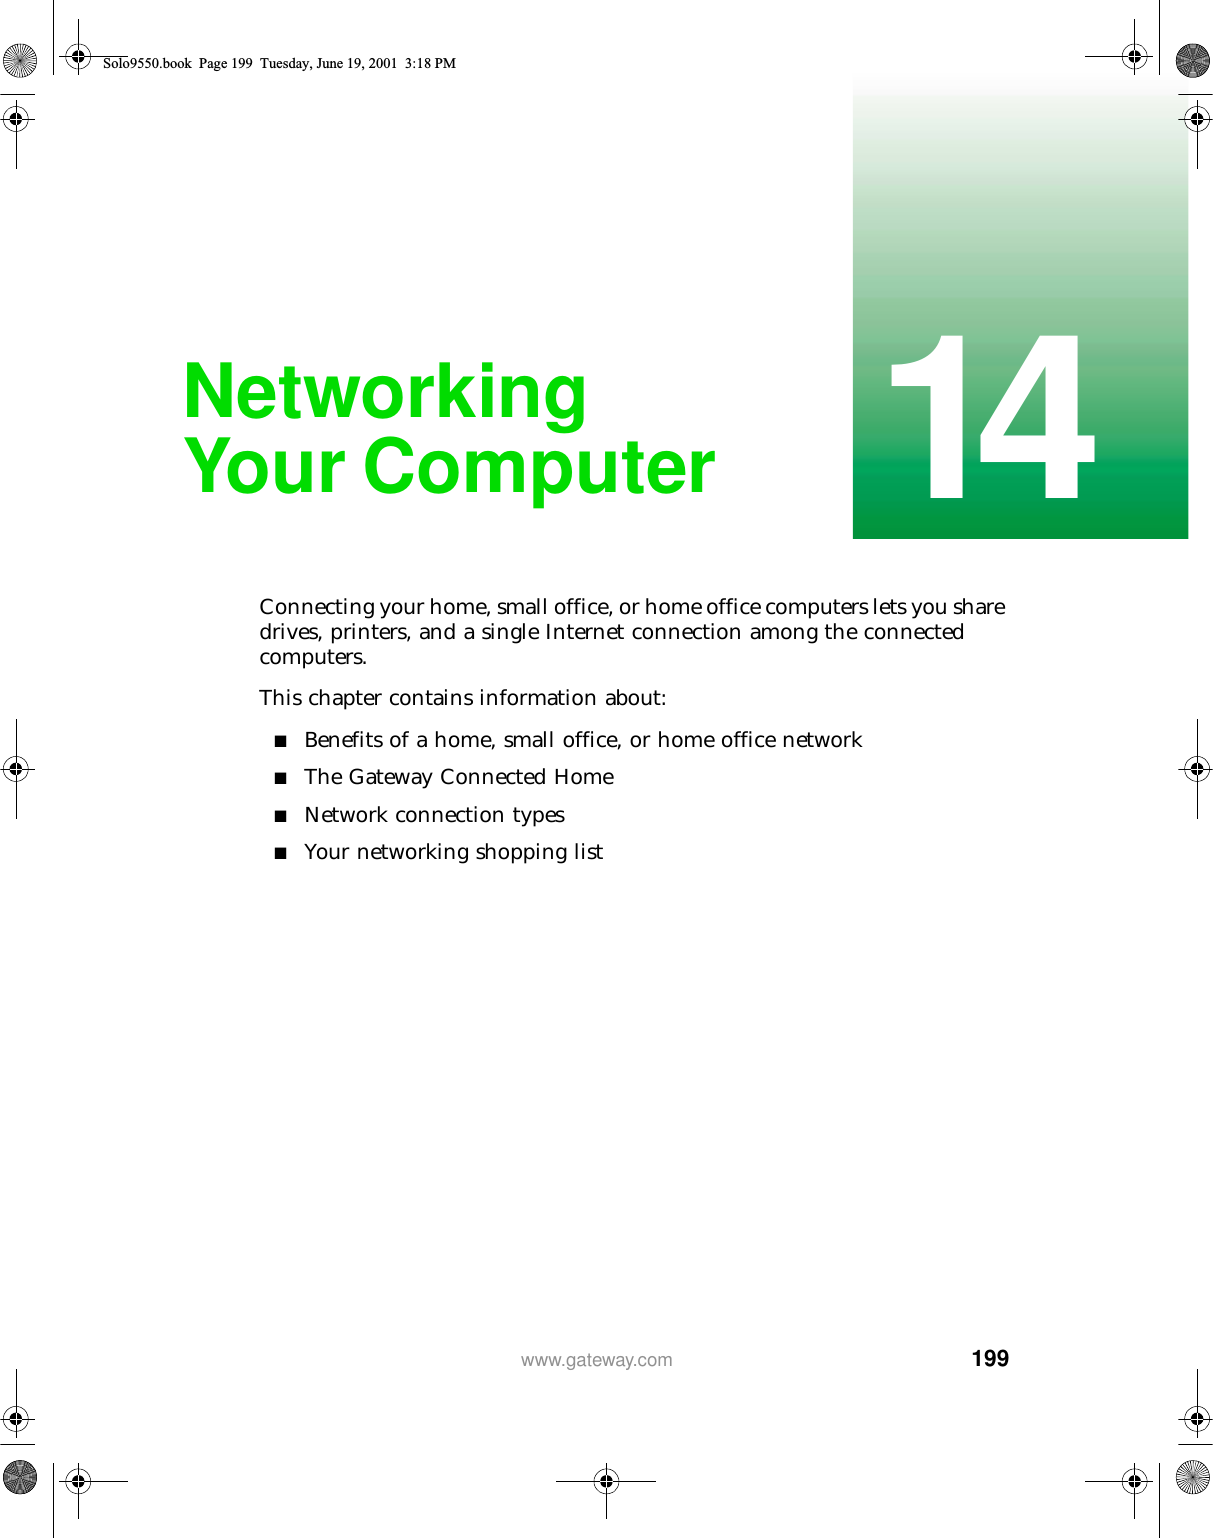 19914www.gateway.comNetworking Your ComputerConnecting your home, small office, or home office computers lets you share drives, printers, and a single Internet connection among the connected computers.This chapter contains information about:■Benefits of a home, small office, or home office network■The Gateway Connected Home■Network connection types■Your networking shopping listSolo9550.book Page 199 Tuesday, June 19, 2001 3:18 PM